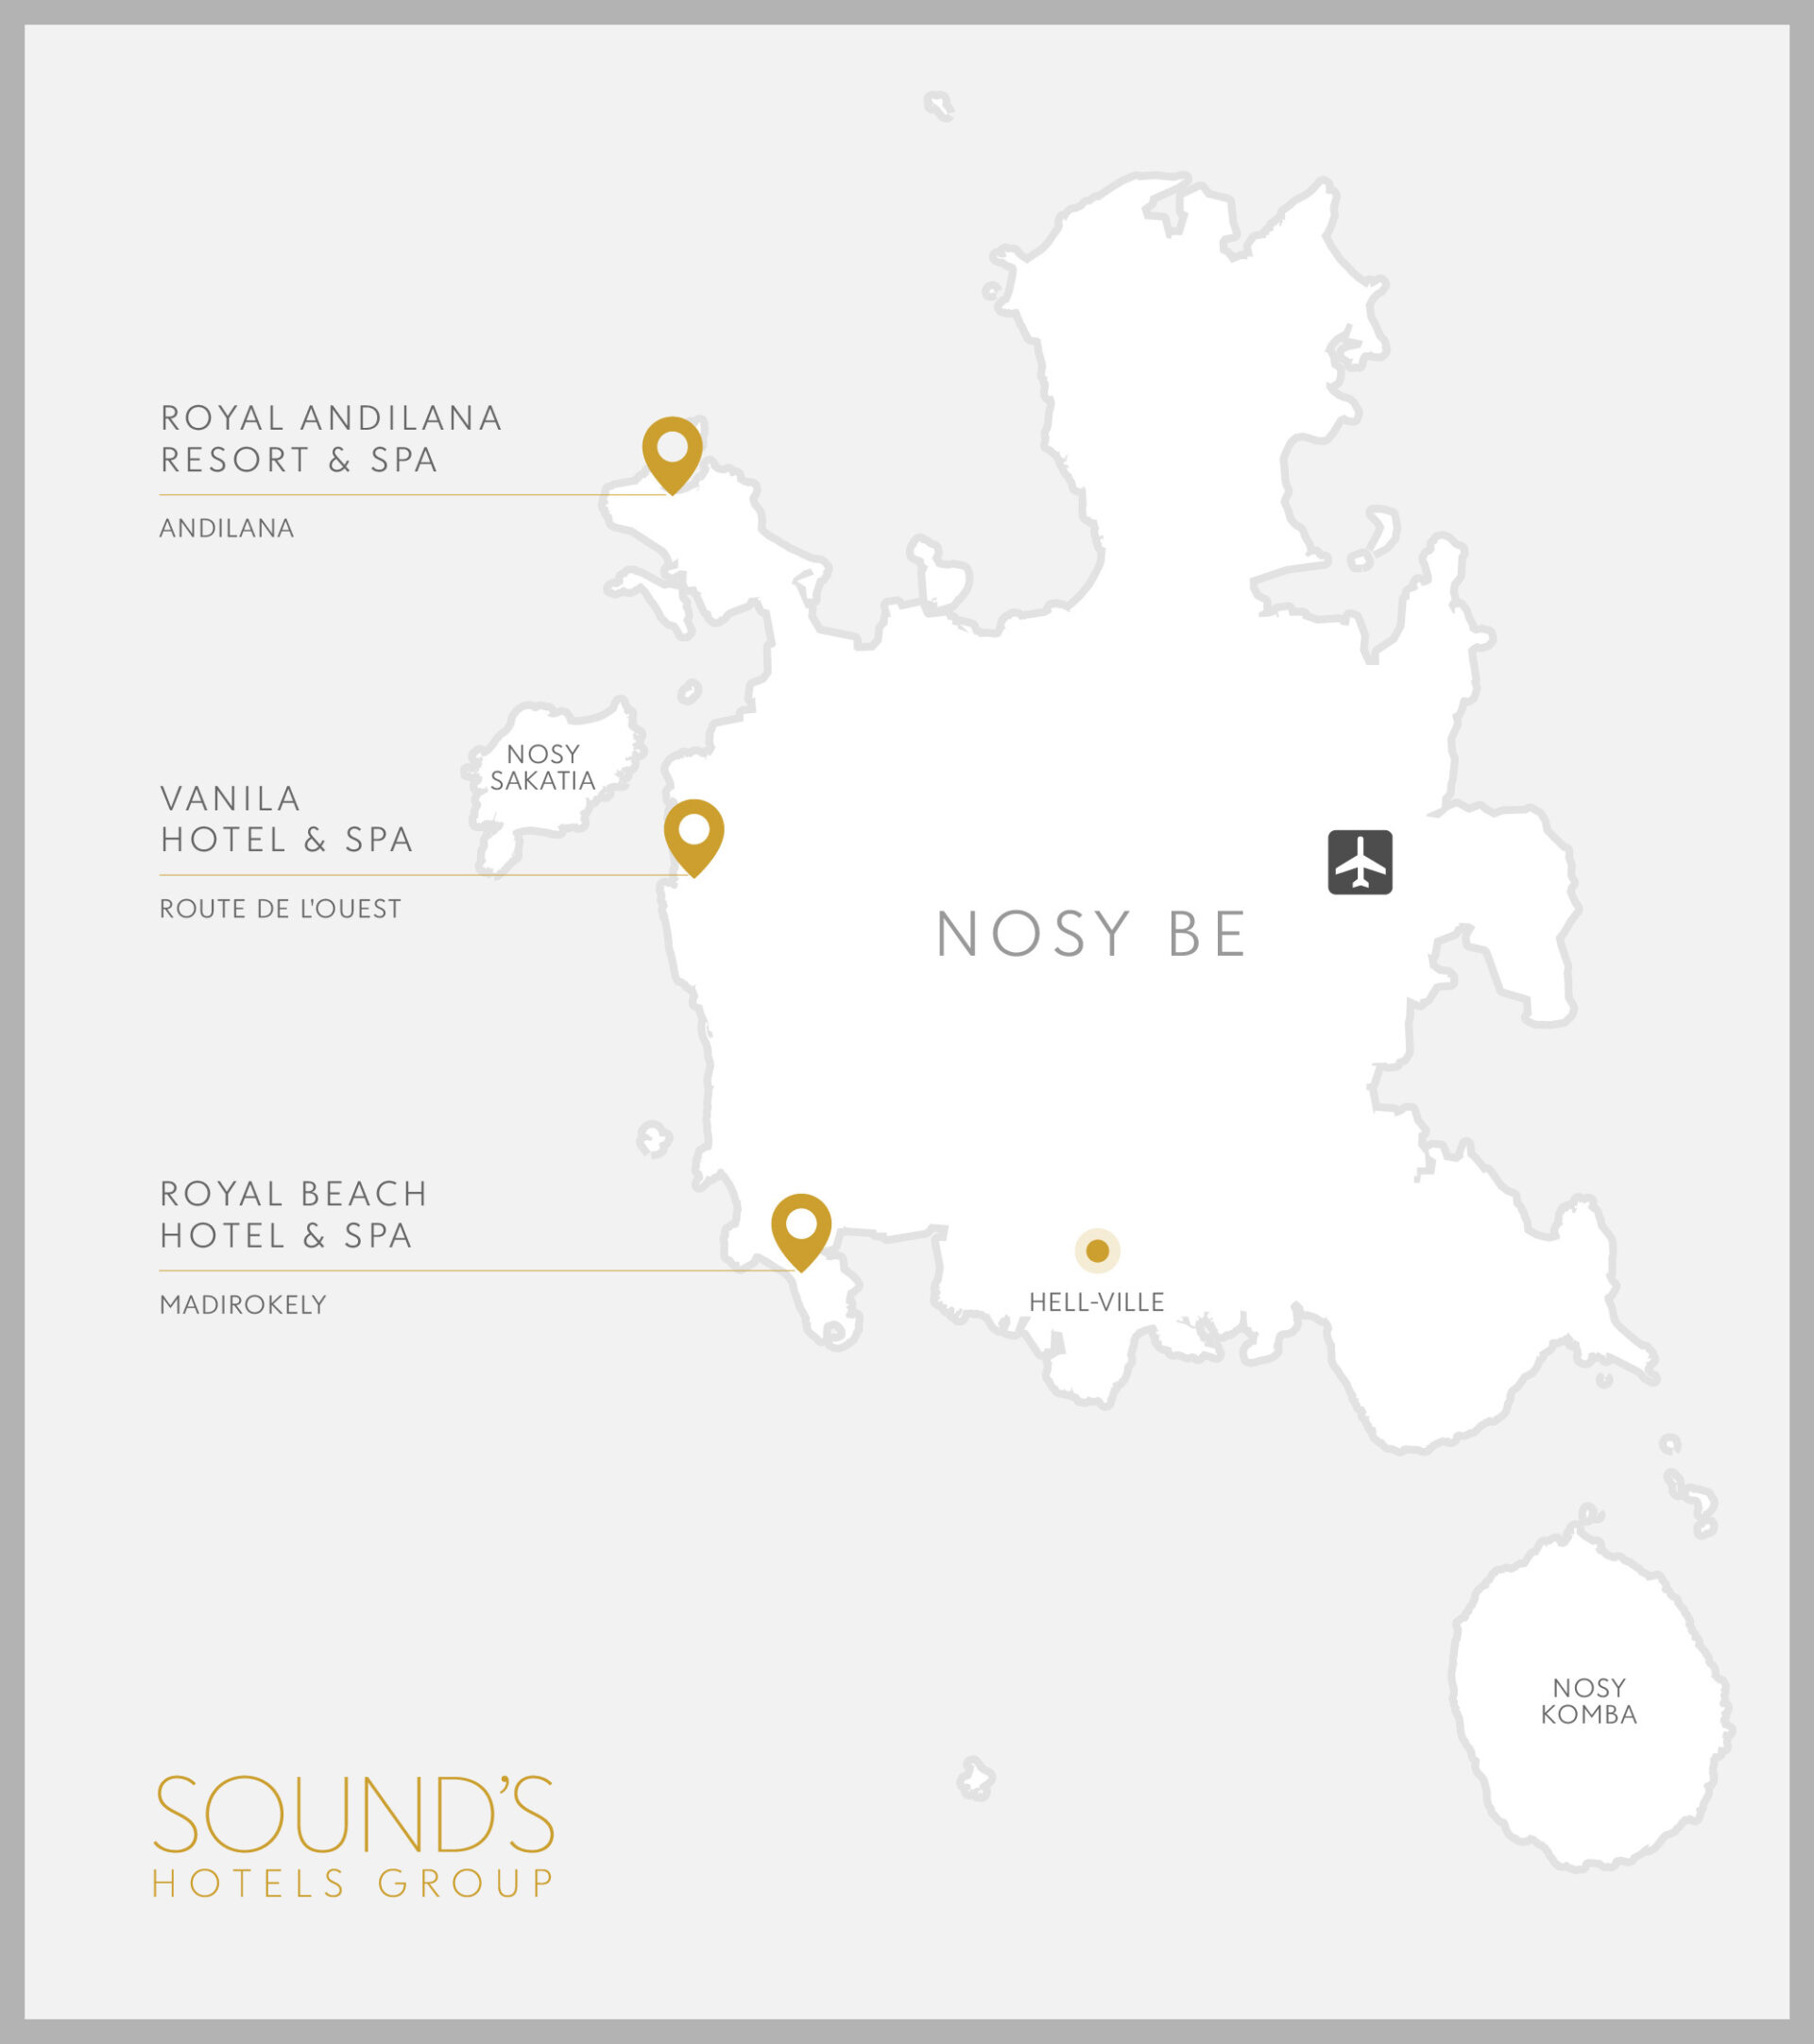 sounds hotels group in nosy be